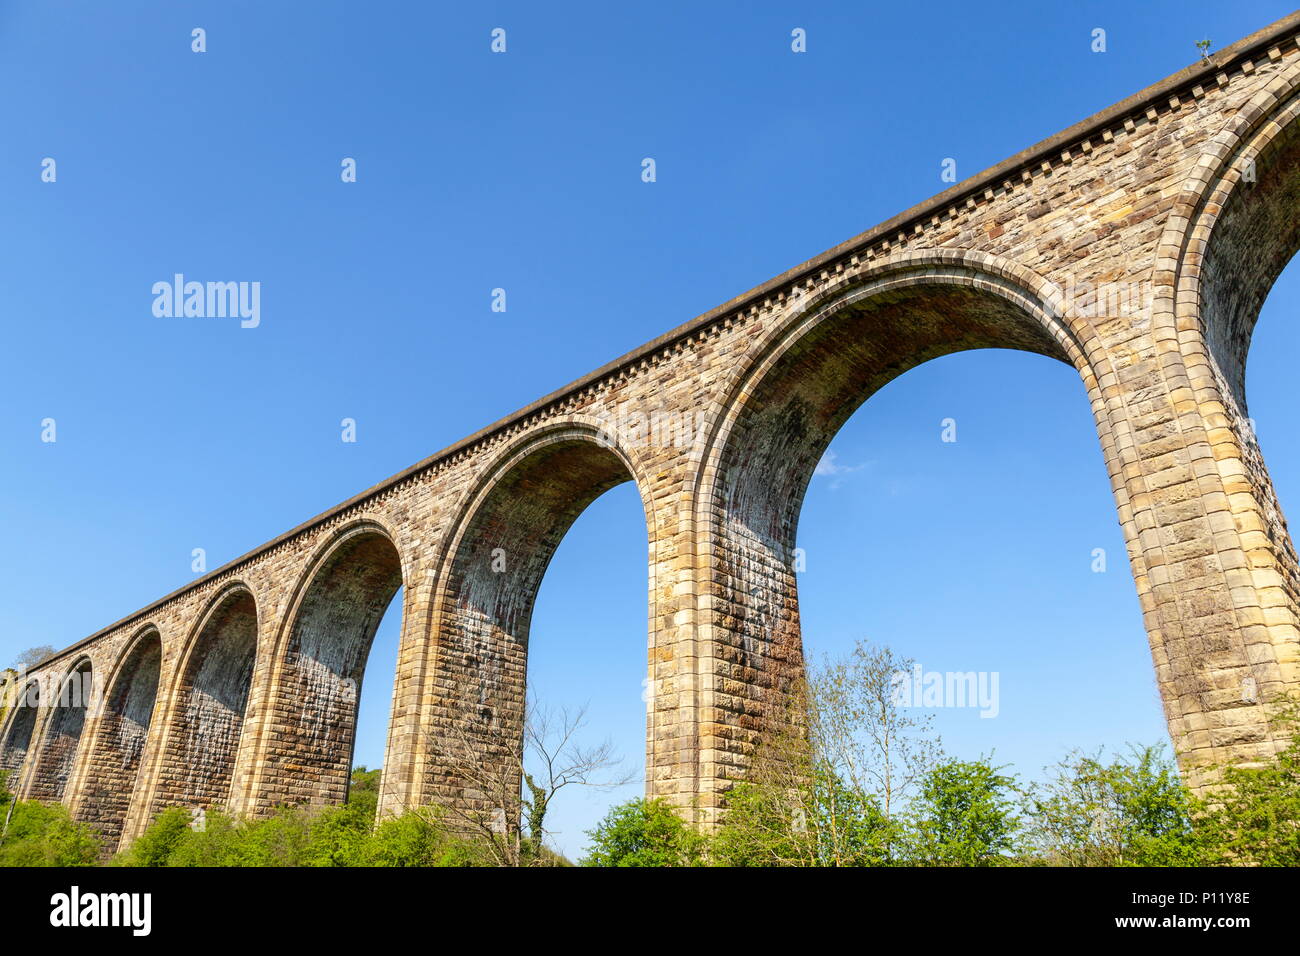 Under the arches of the Cefn Mawr railway viaduct which crosses the Dee valley near Wrexham Stock Photo